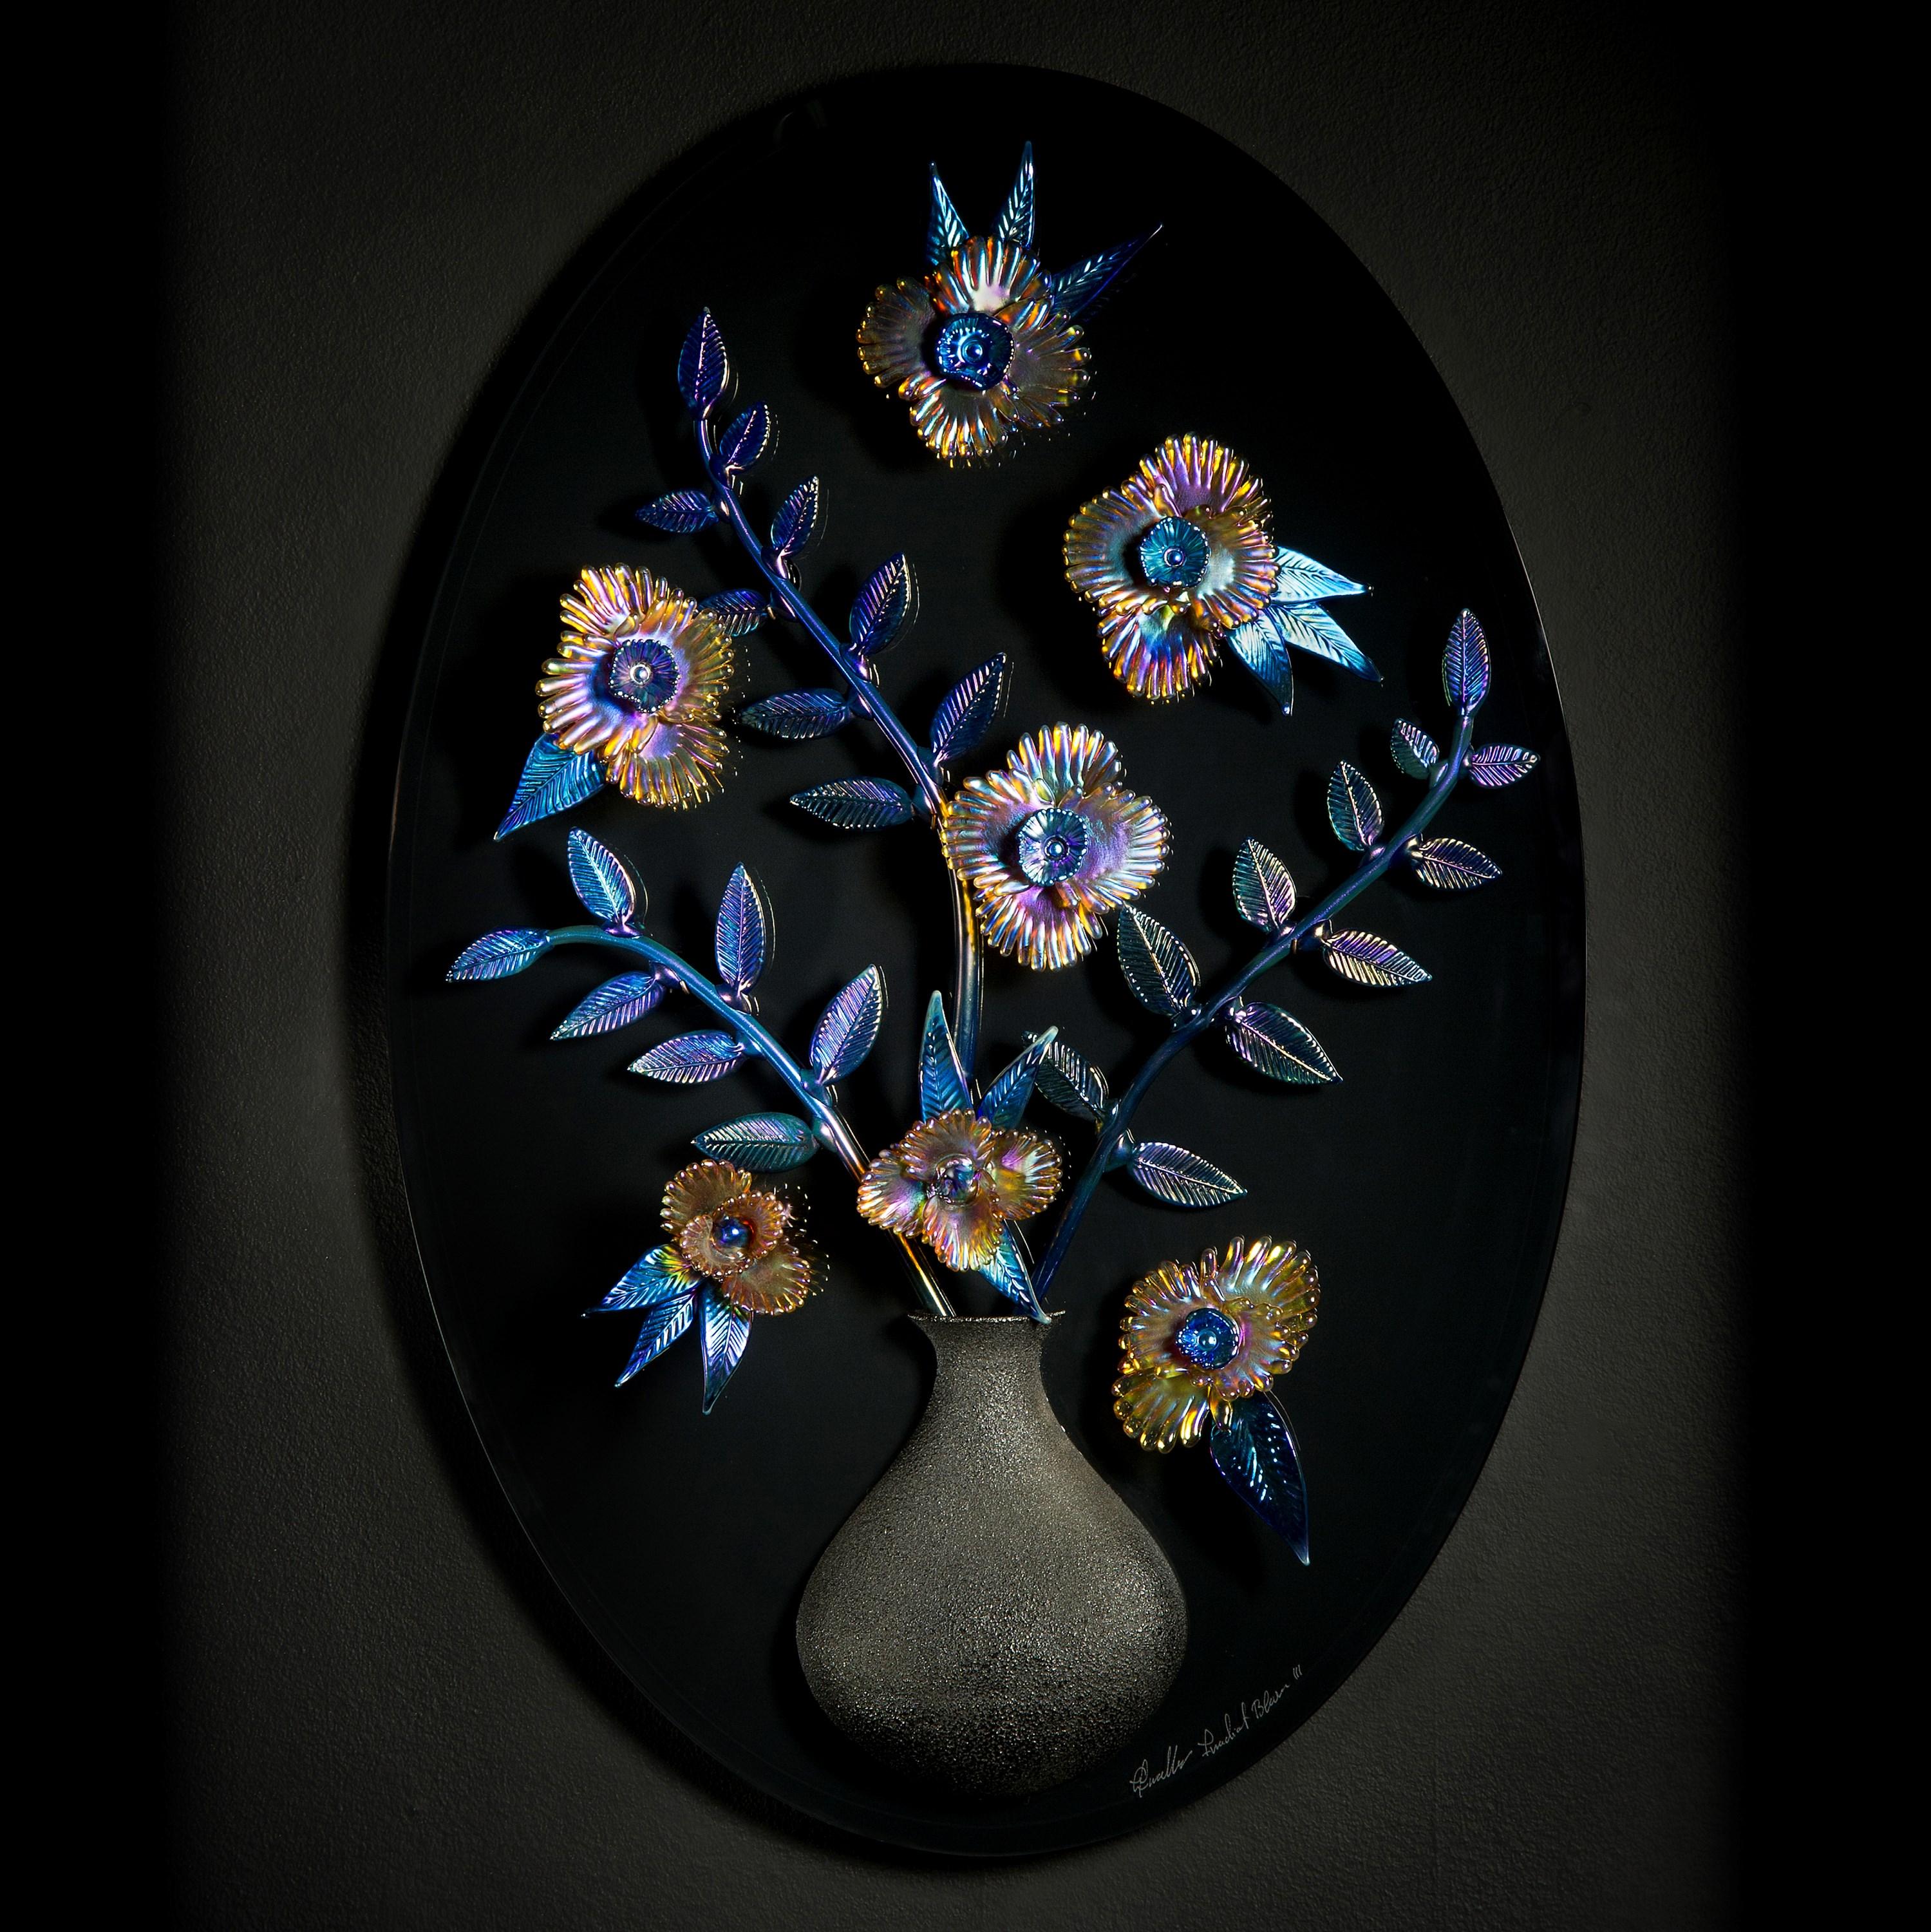 Irradiant Bloom III is an oval sculptural wall mounted artwork by the British artist and Blown Away II series winner, Elliot Walker. The artwork features hand-sculpted iridescent flowers with a bisected black vase that is bonded to the back. The